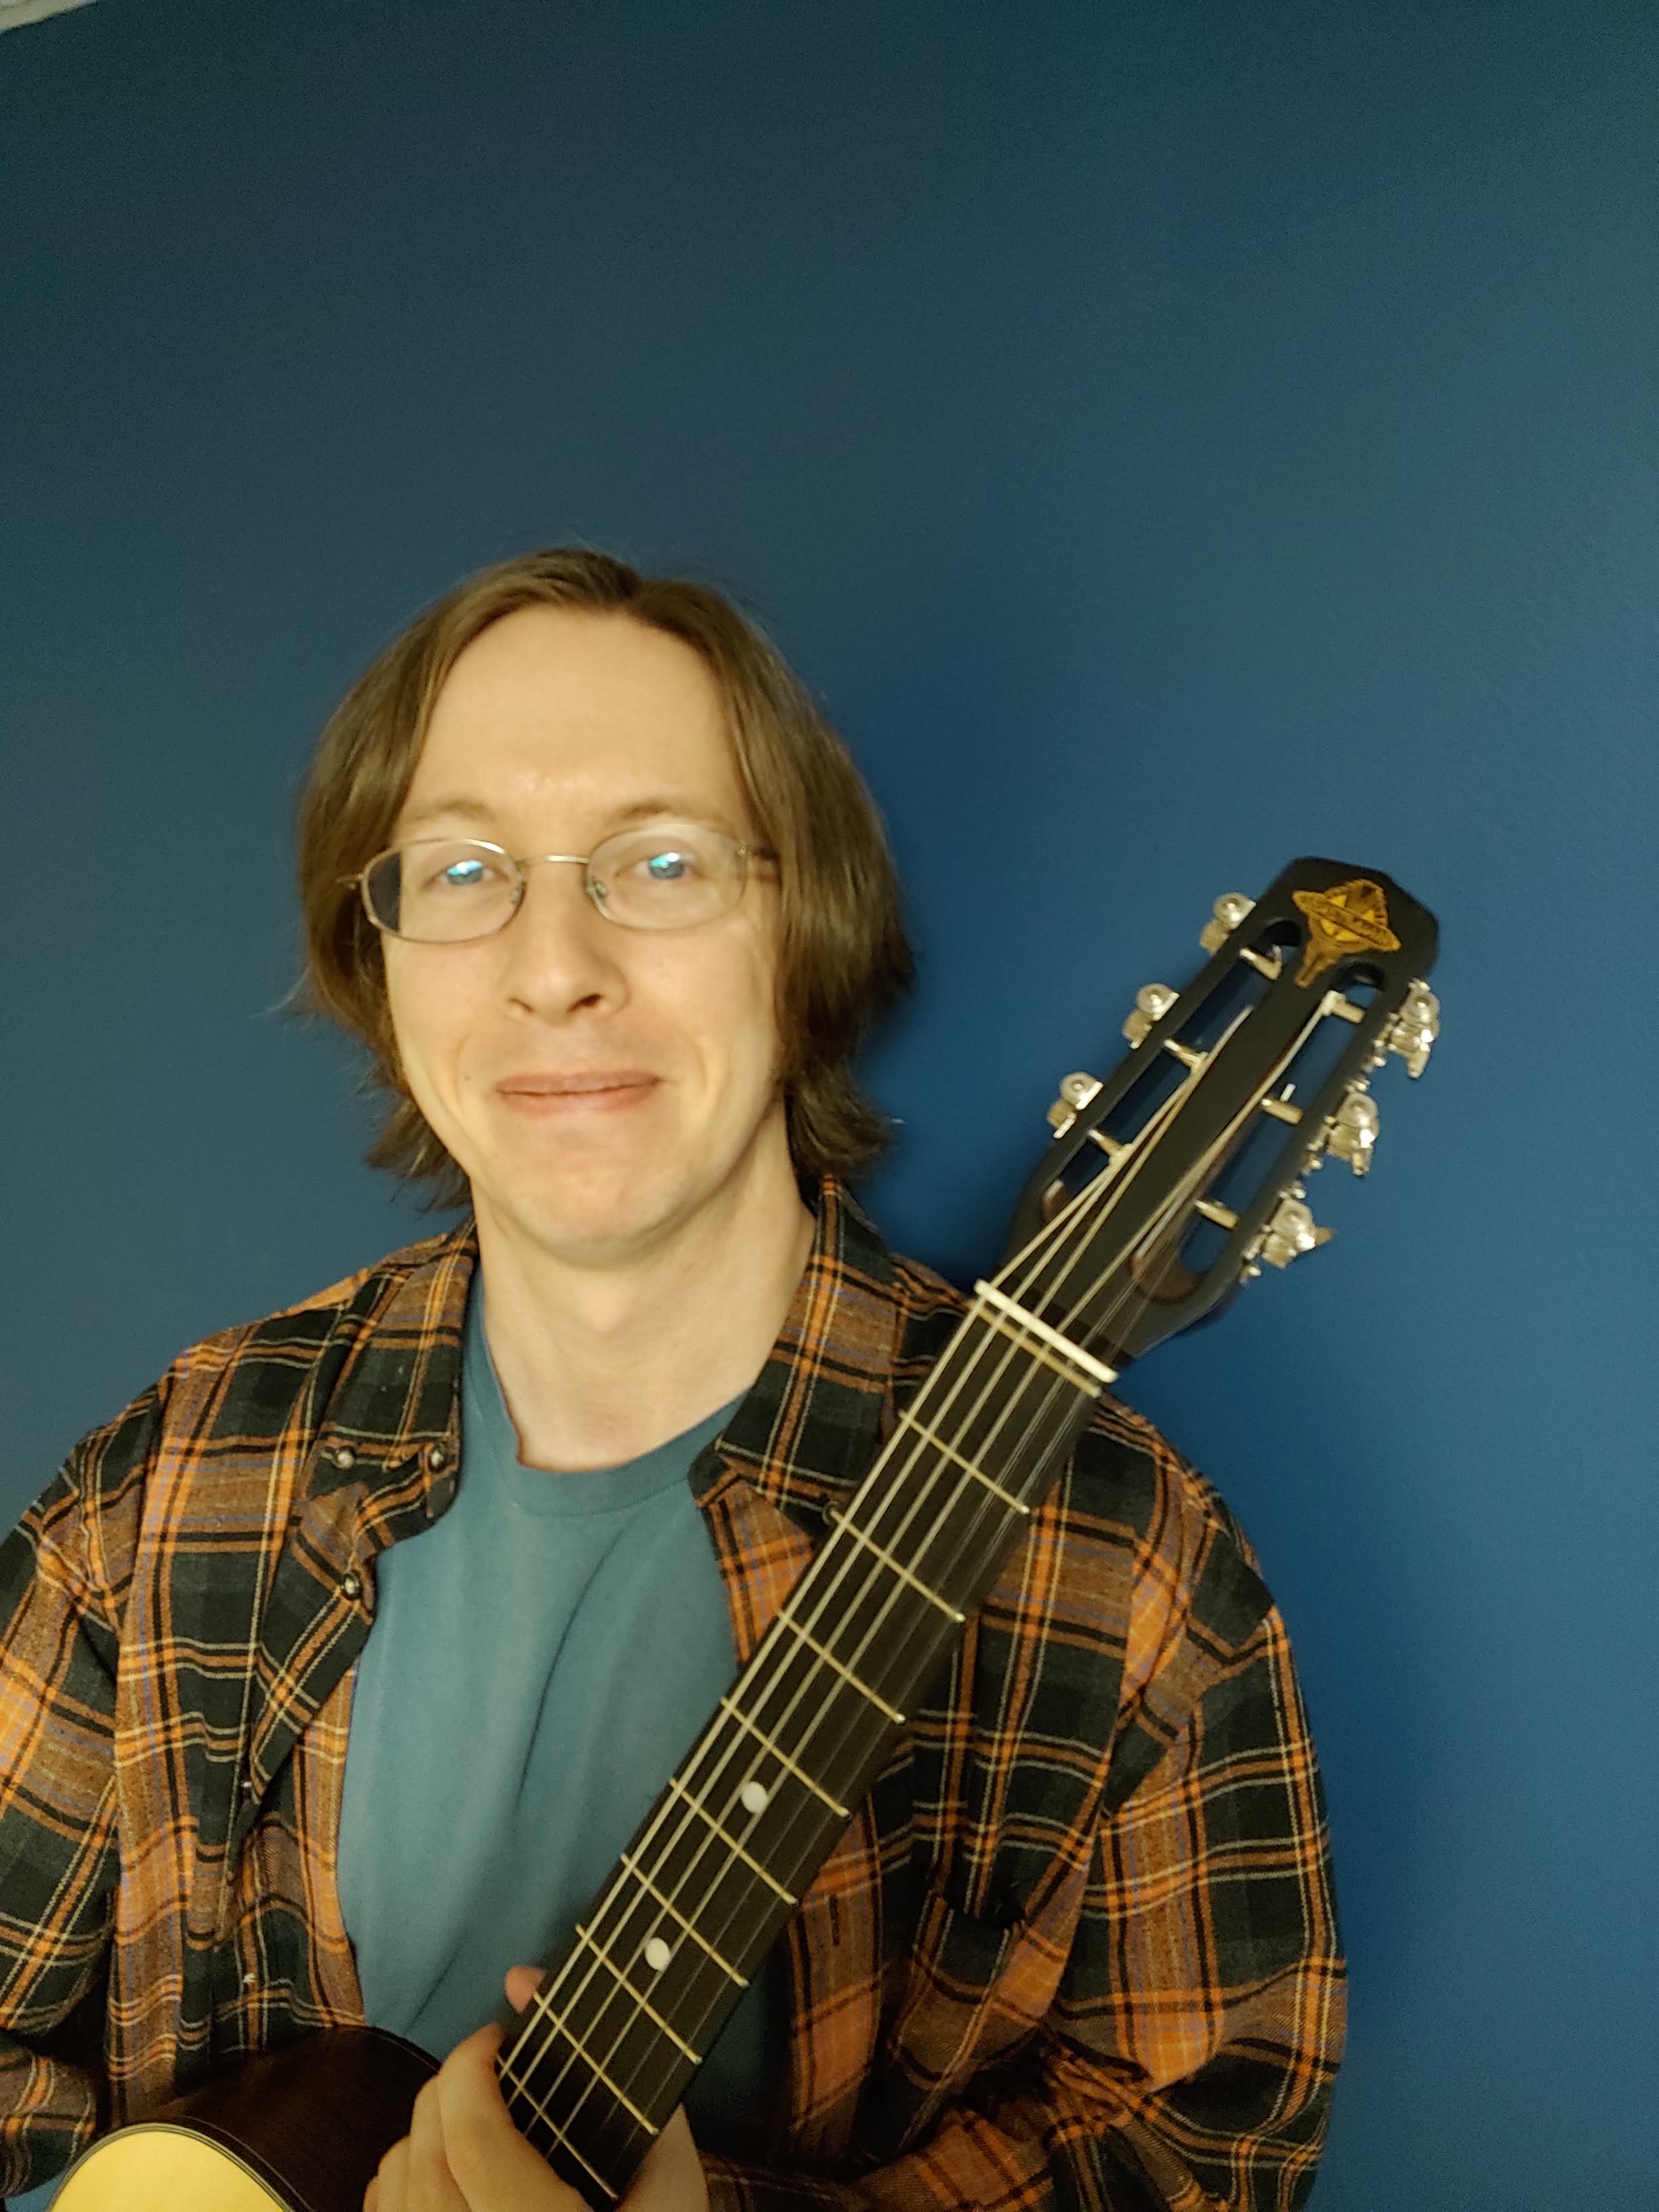 The author, Joe, holding a Selmer-style acoustic guitar with most of the neck and headstock visible.